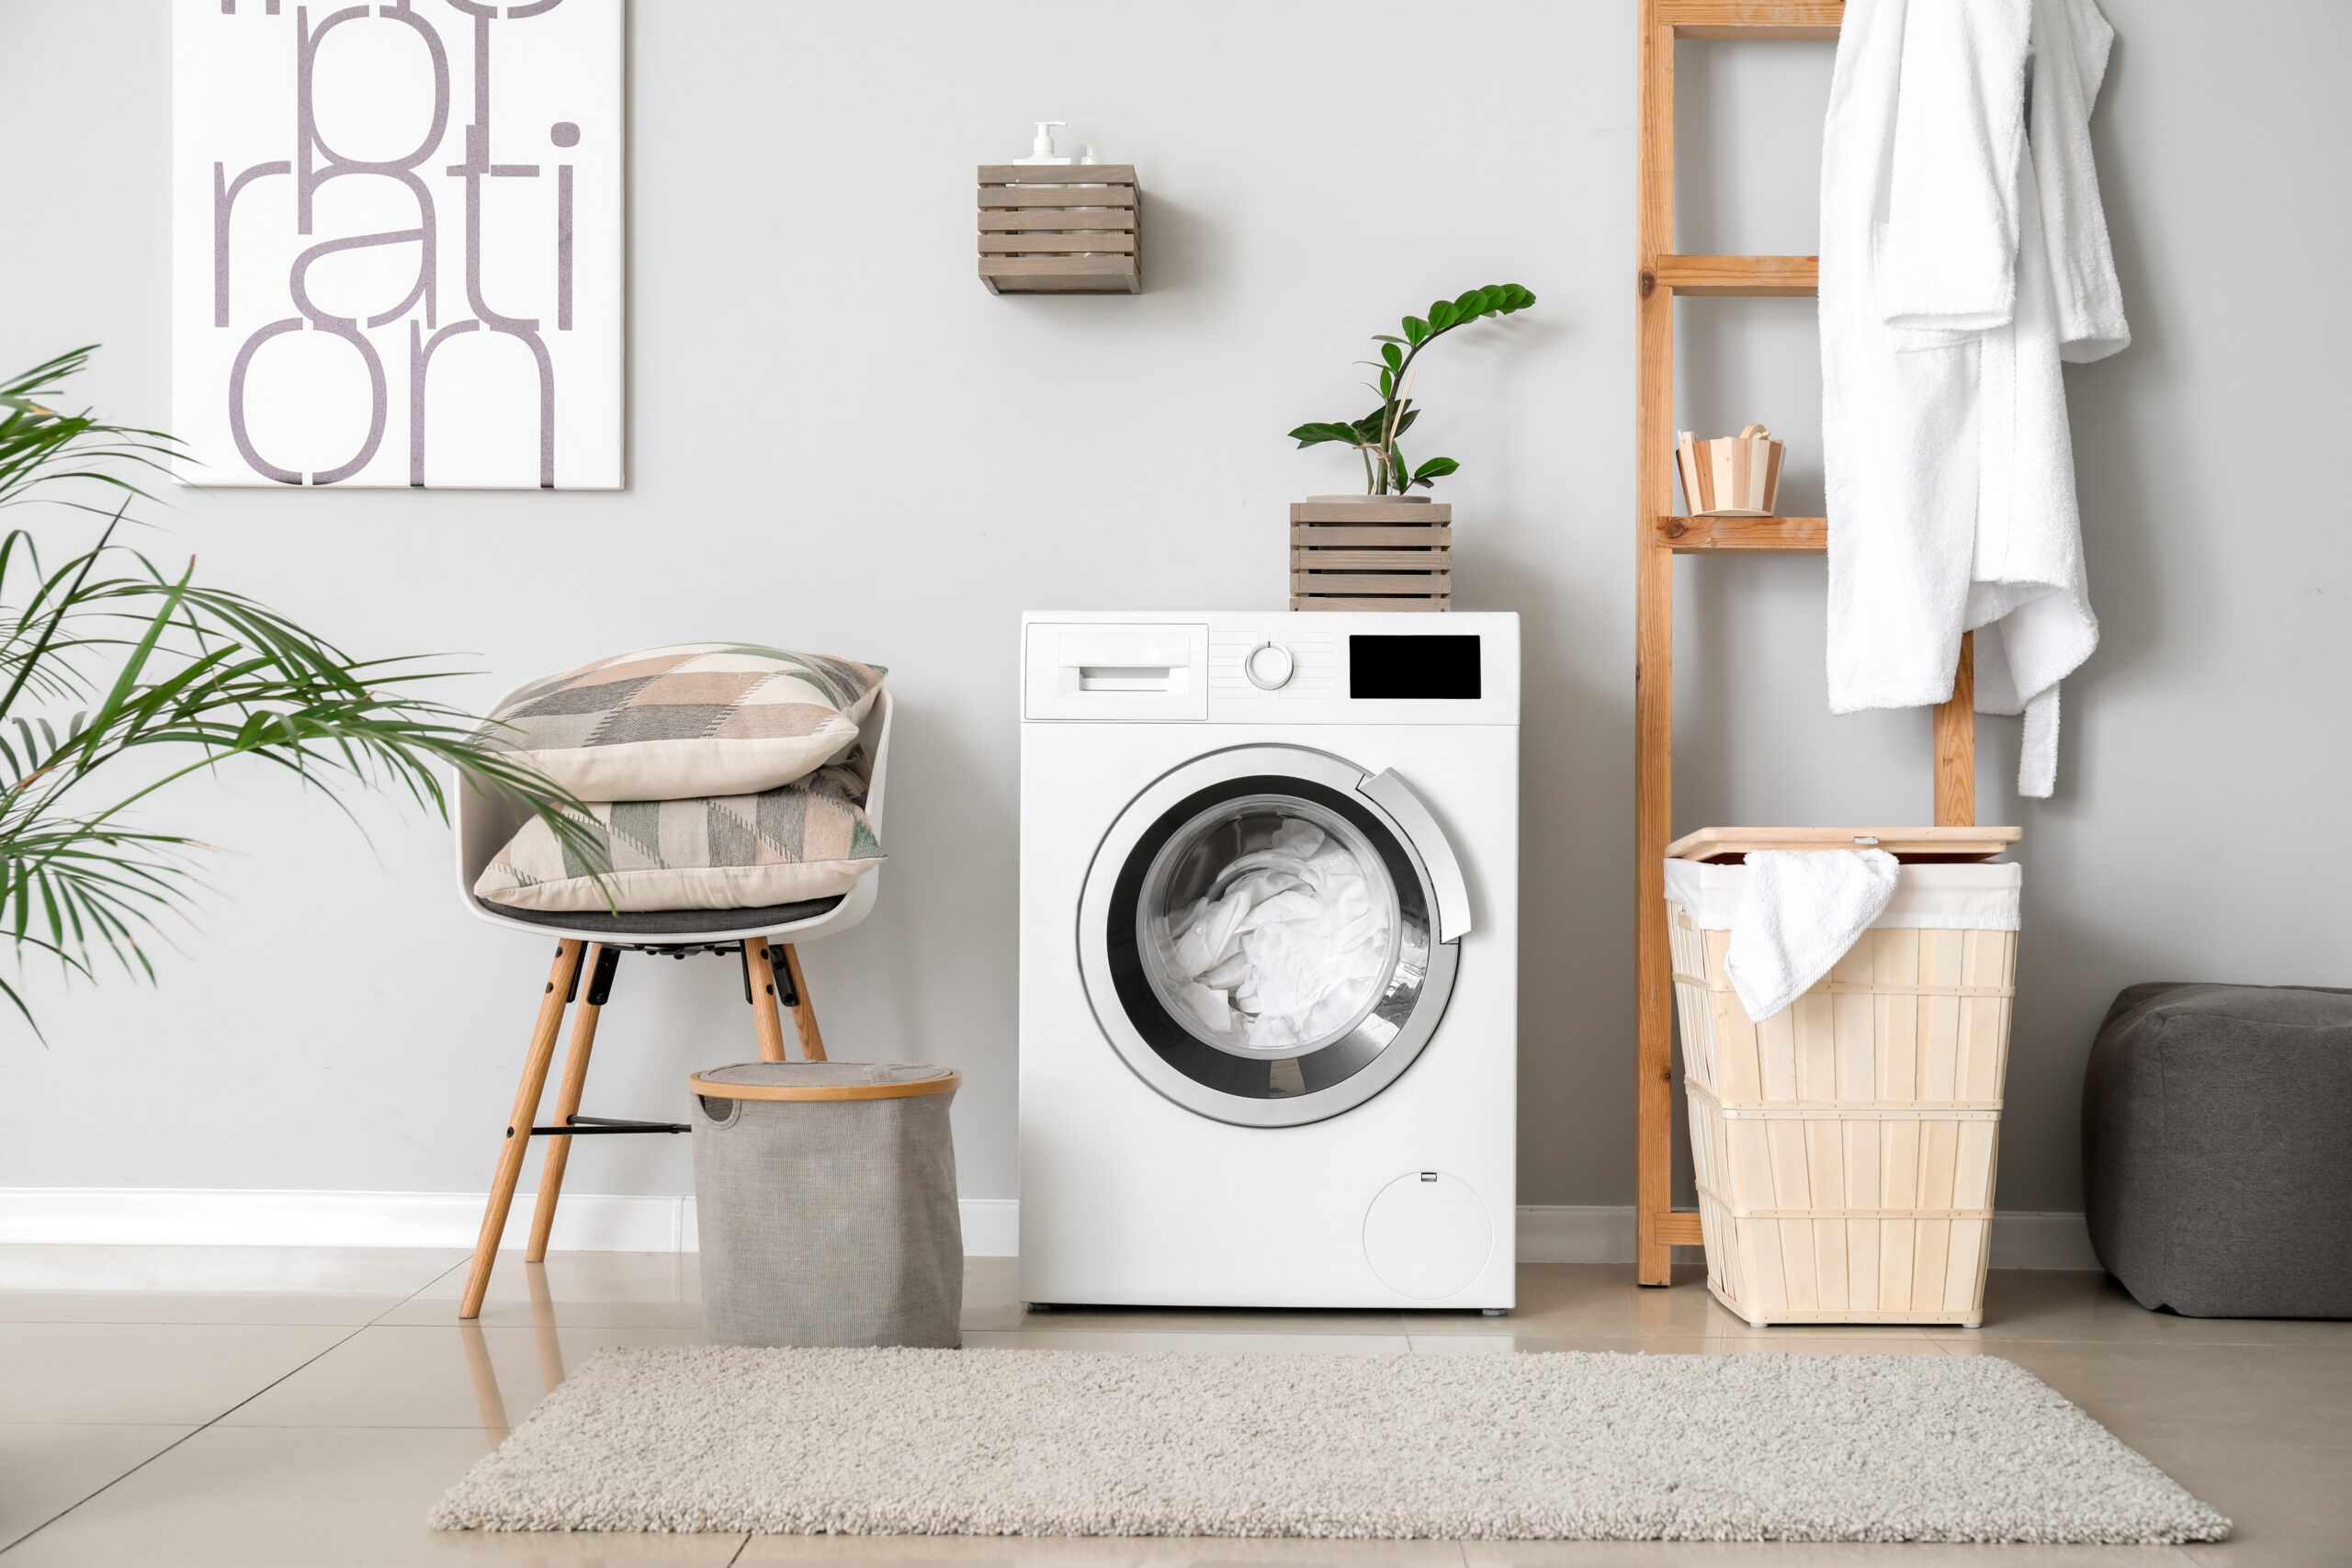 Fresh and clean: How Microbial Control transforms your laundry routine